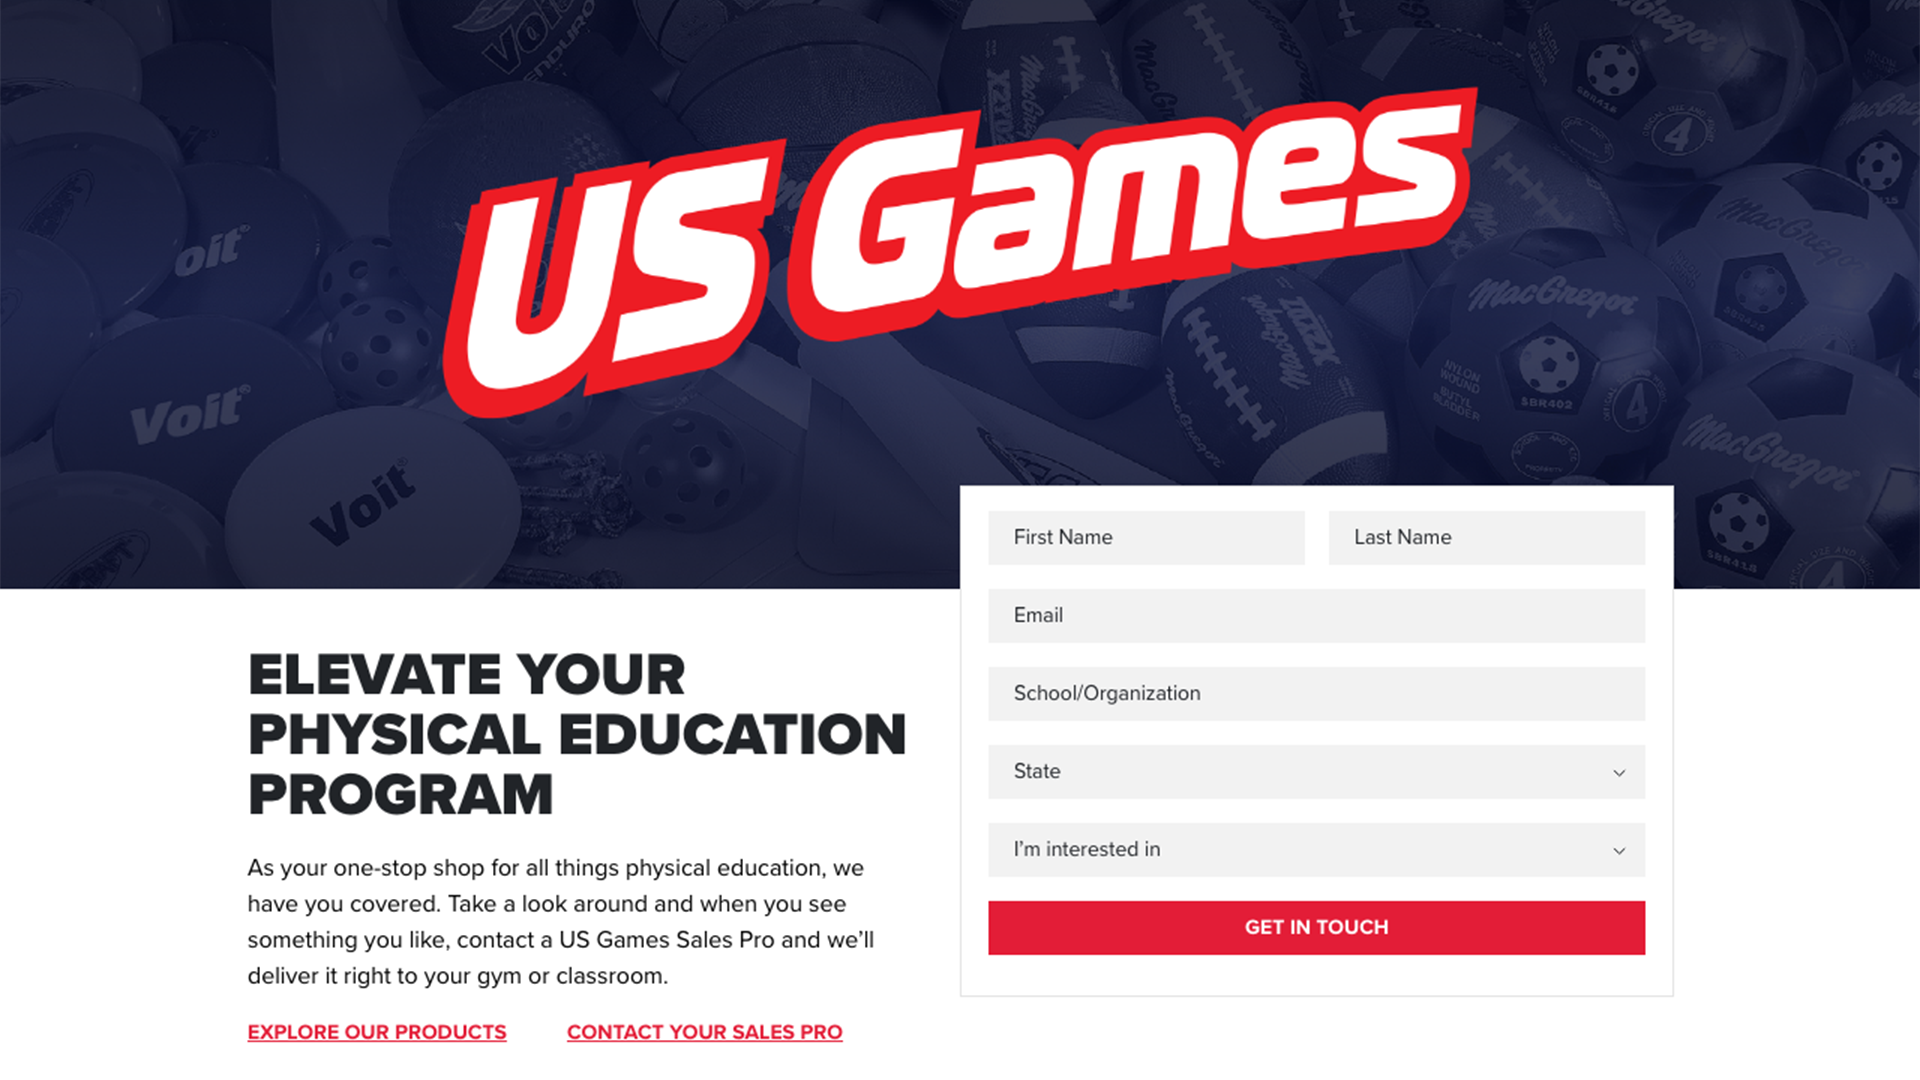 US Games Lead Generation Landing Page